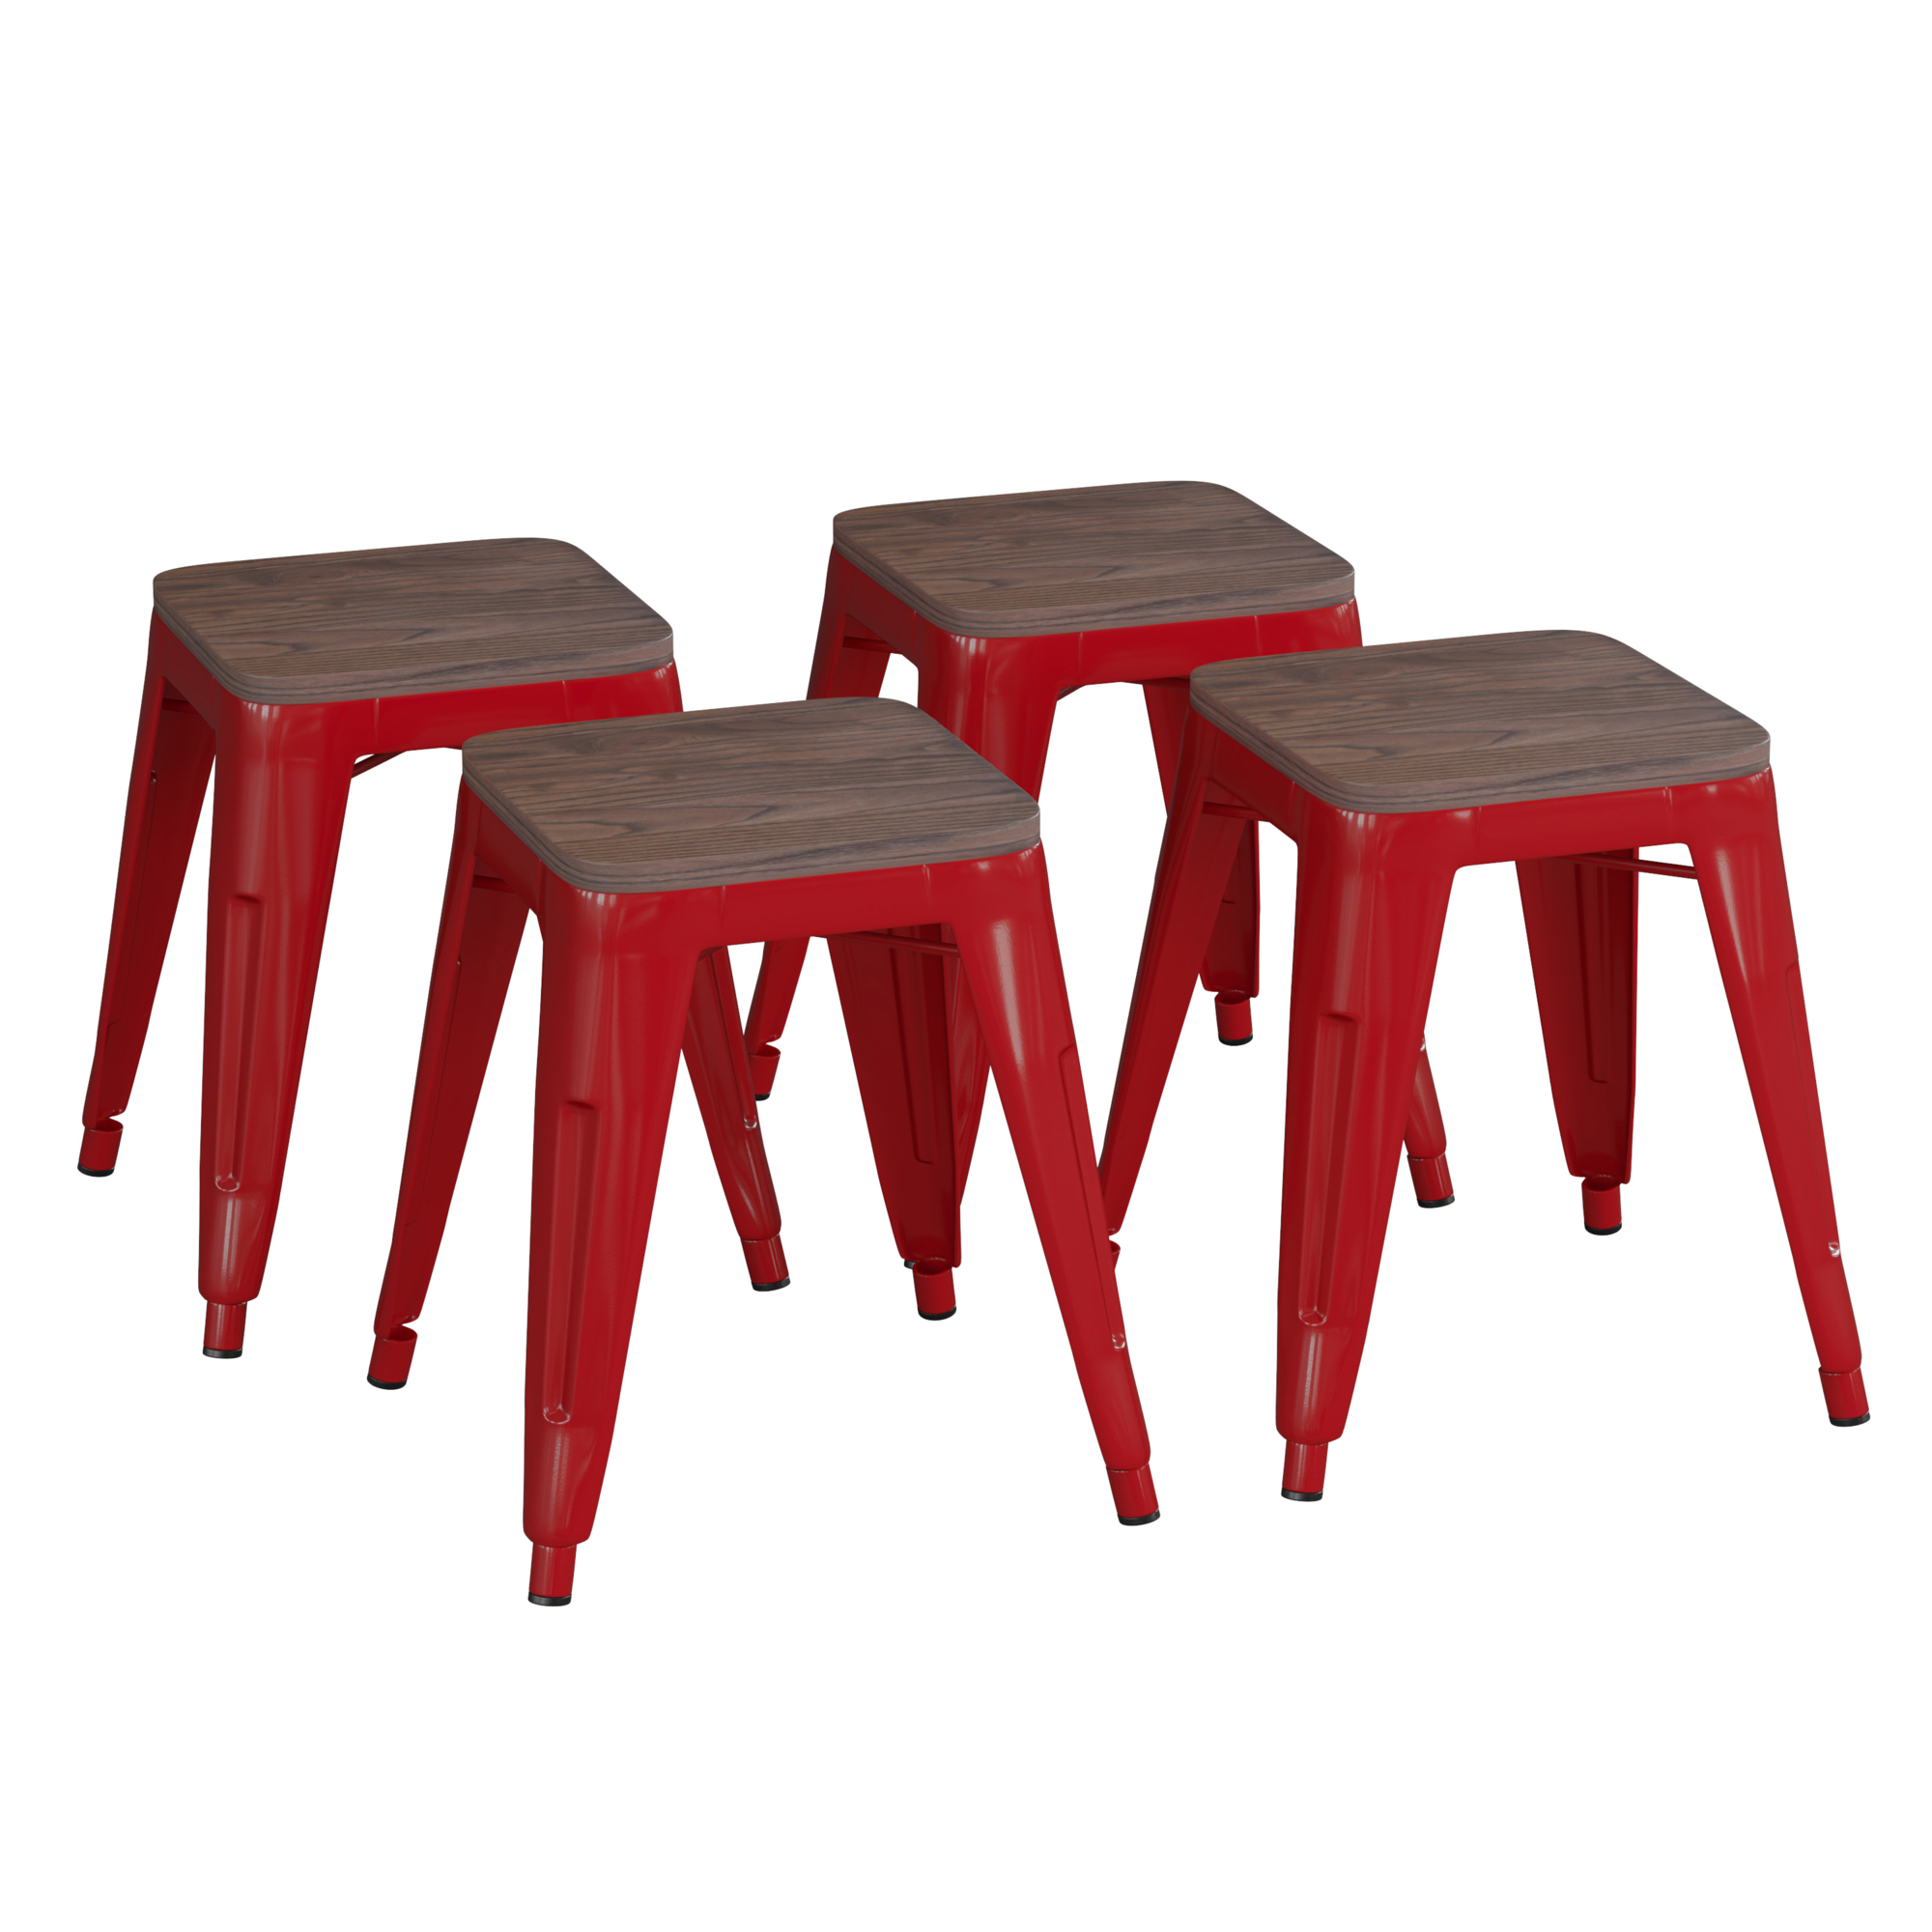 Flash Furniture, 4 Pack 18Inch Red Metal Stool with Wood Seat, Primary Color Red, Included (qty.) 4, Model ETBT350318REDWD